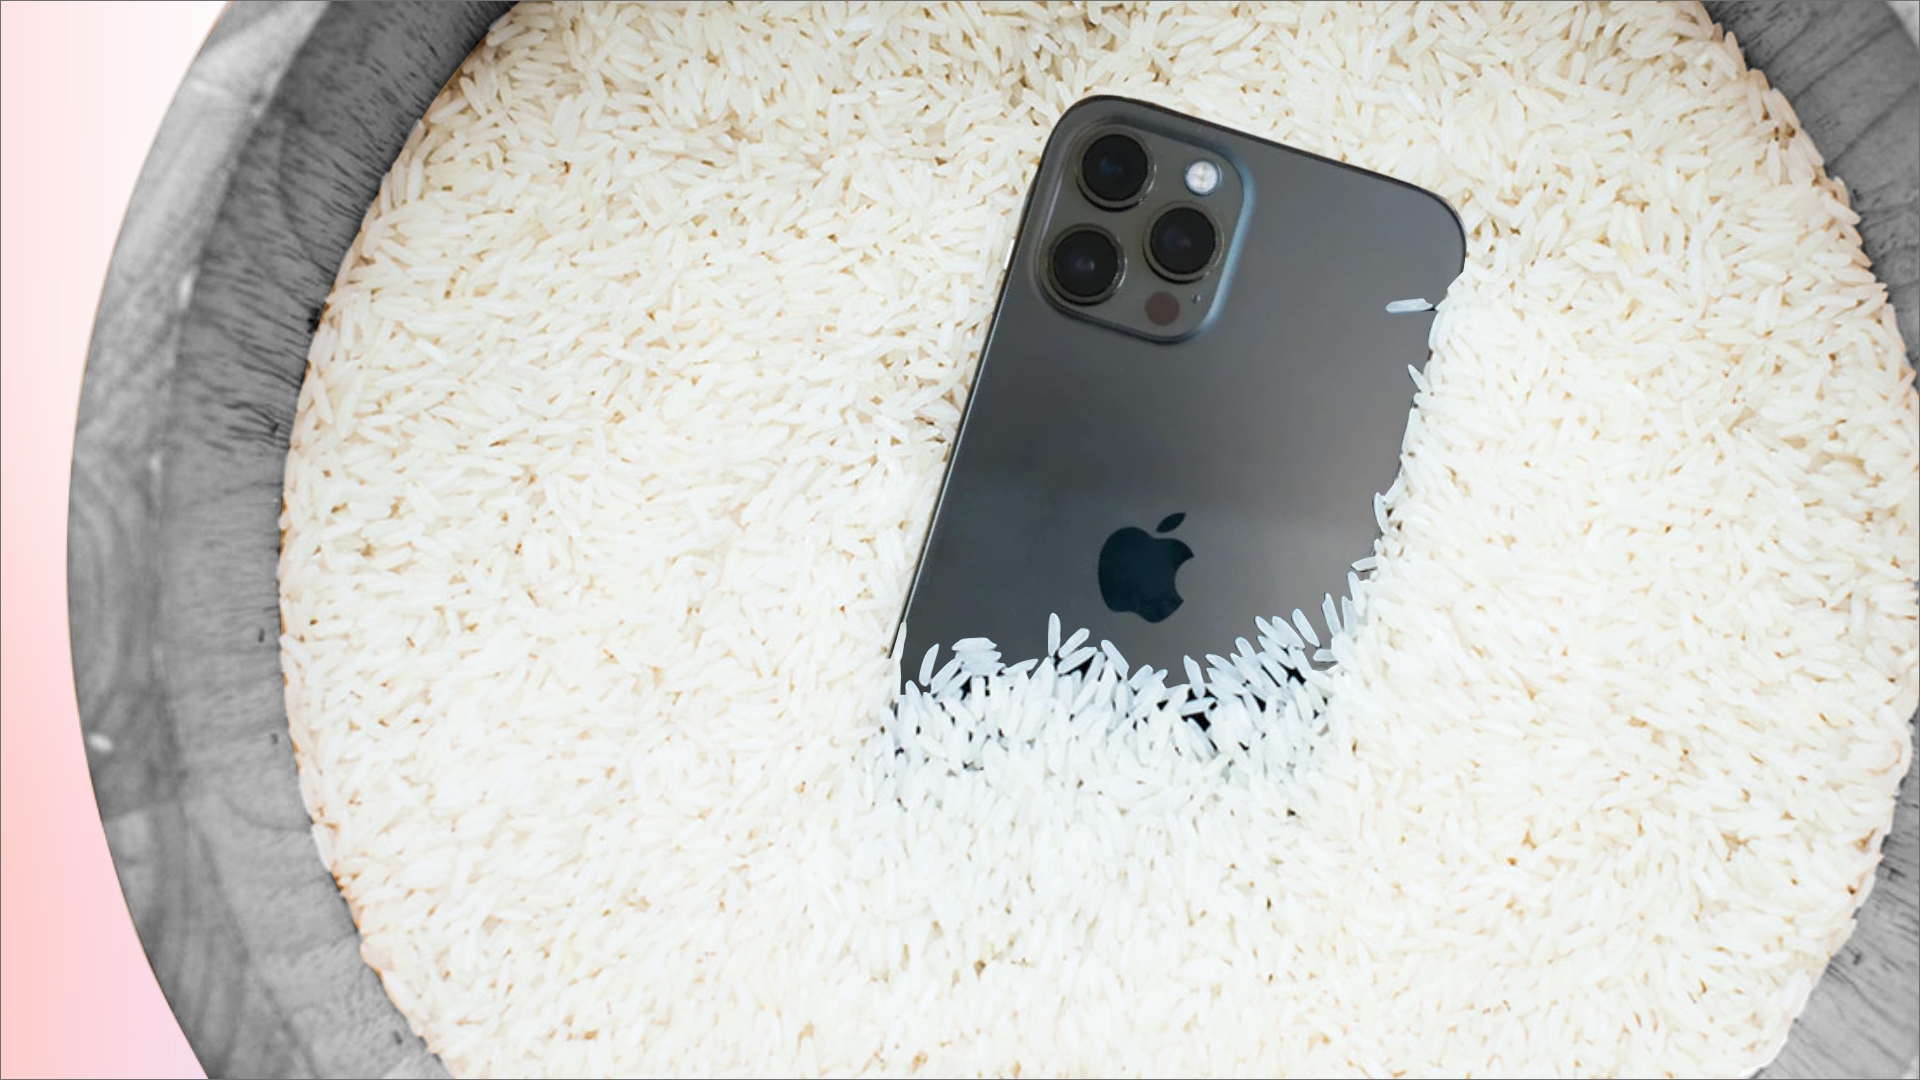 How to get water out of iPhone camera by submerging it in rice